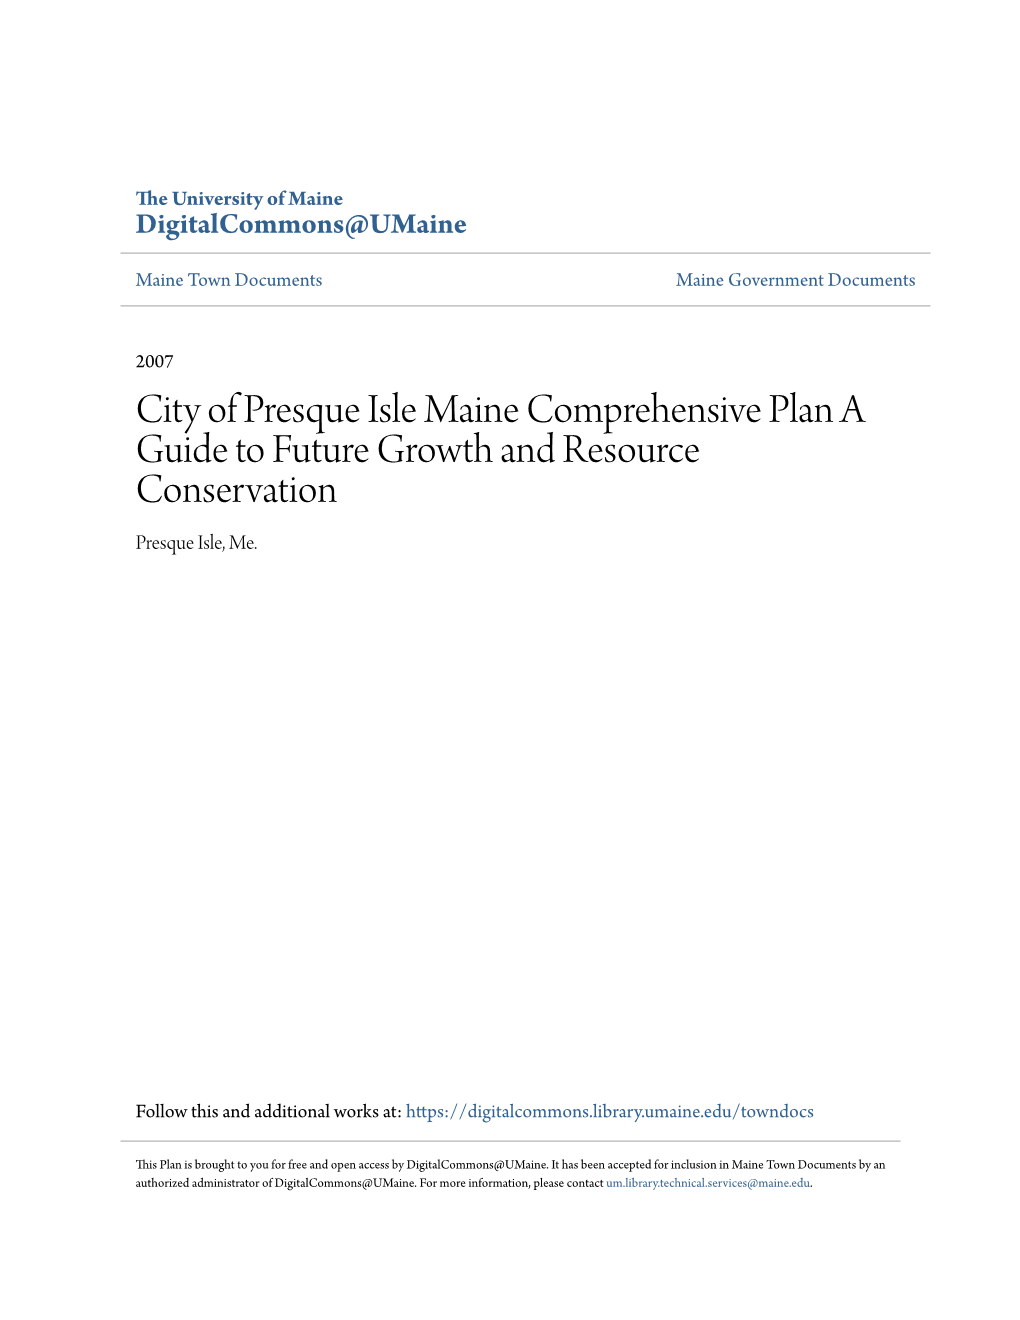 City of Presque Isle Maine Comprehensive Plan a Guide to Future Growth and Resource Conservation Presque Isle, Me